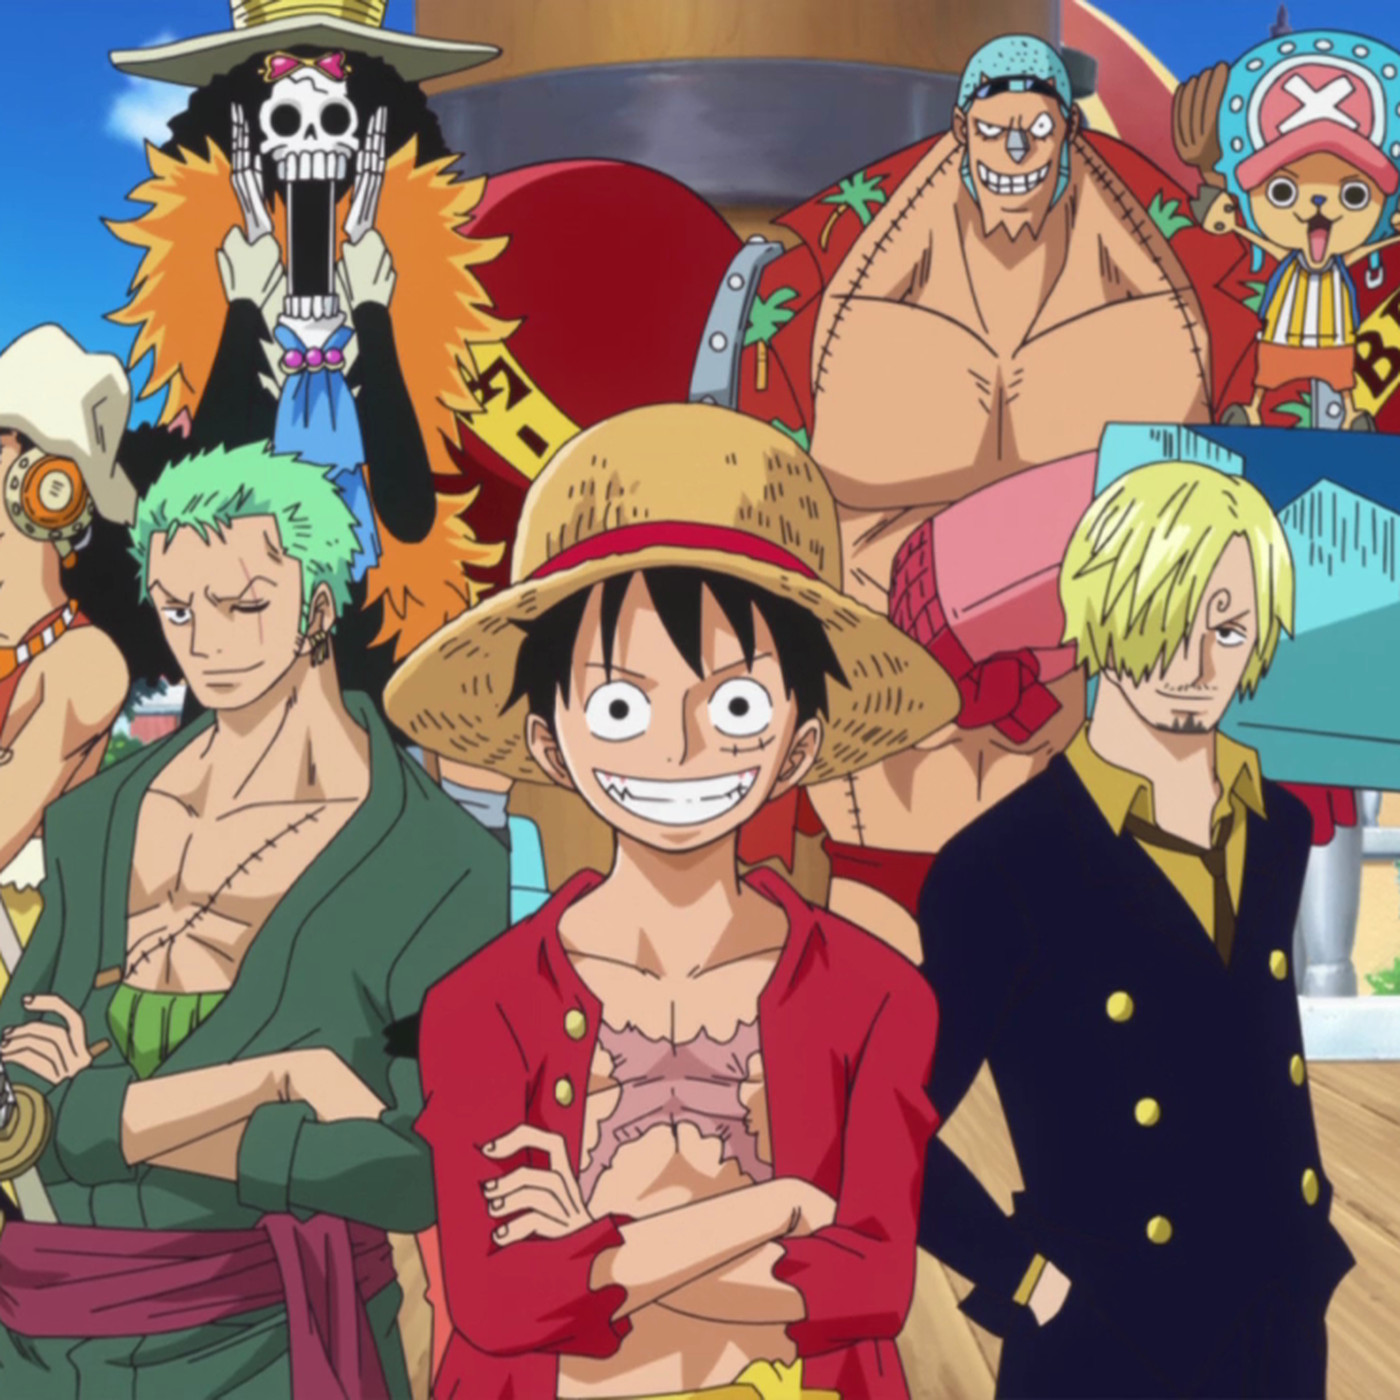 How One Piece Reconciled Netflix with Anime and Manga